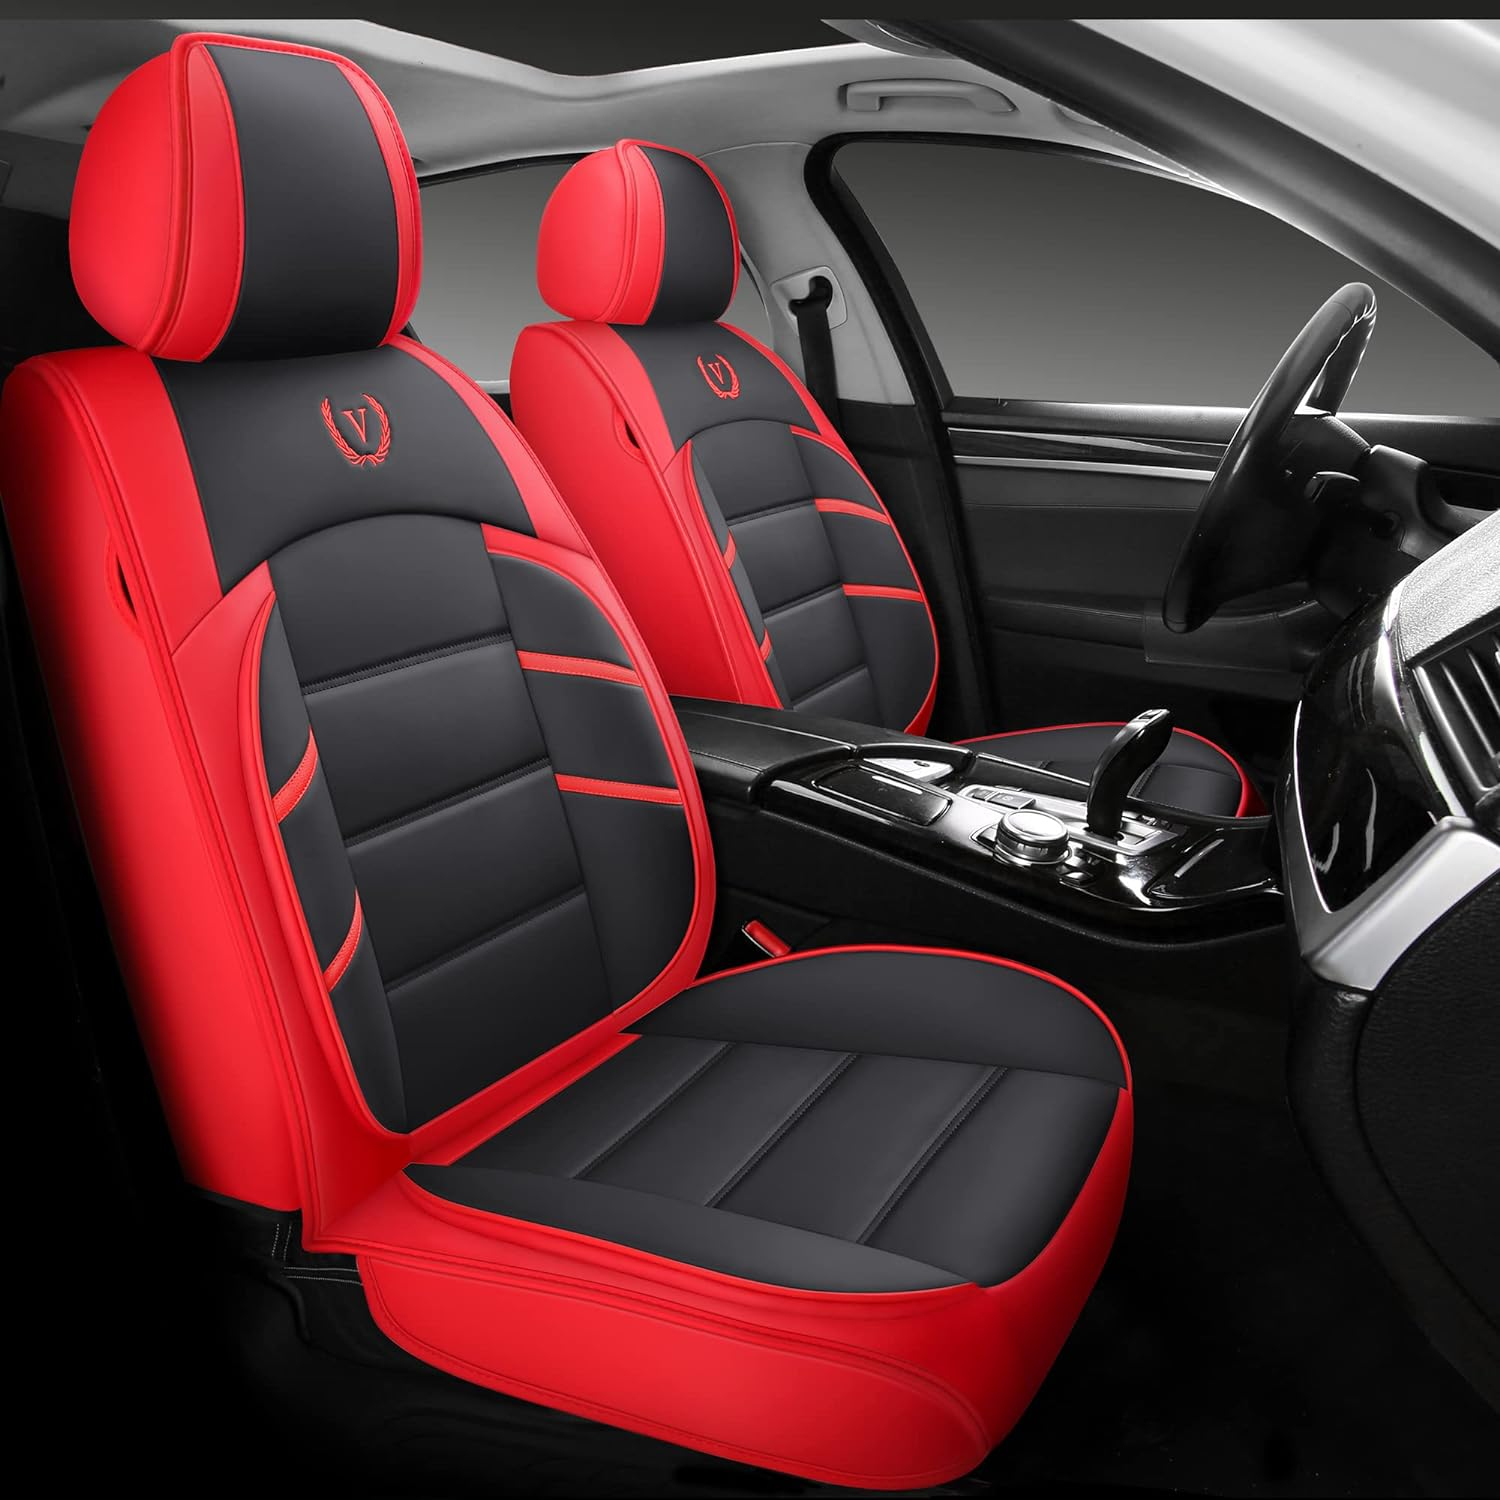 Comfortable Black and Red Leather Car Seat Covers - Full 5-Seater Set, Universal Fit for Most Vehicles